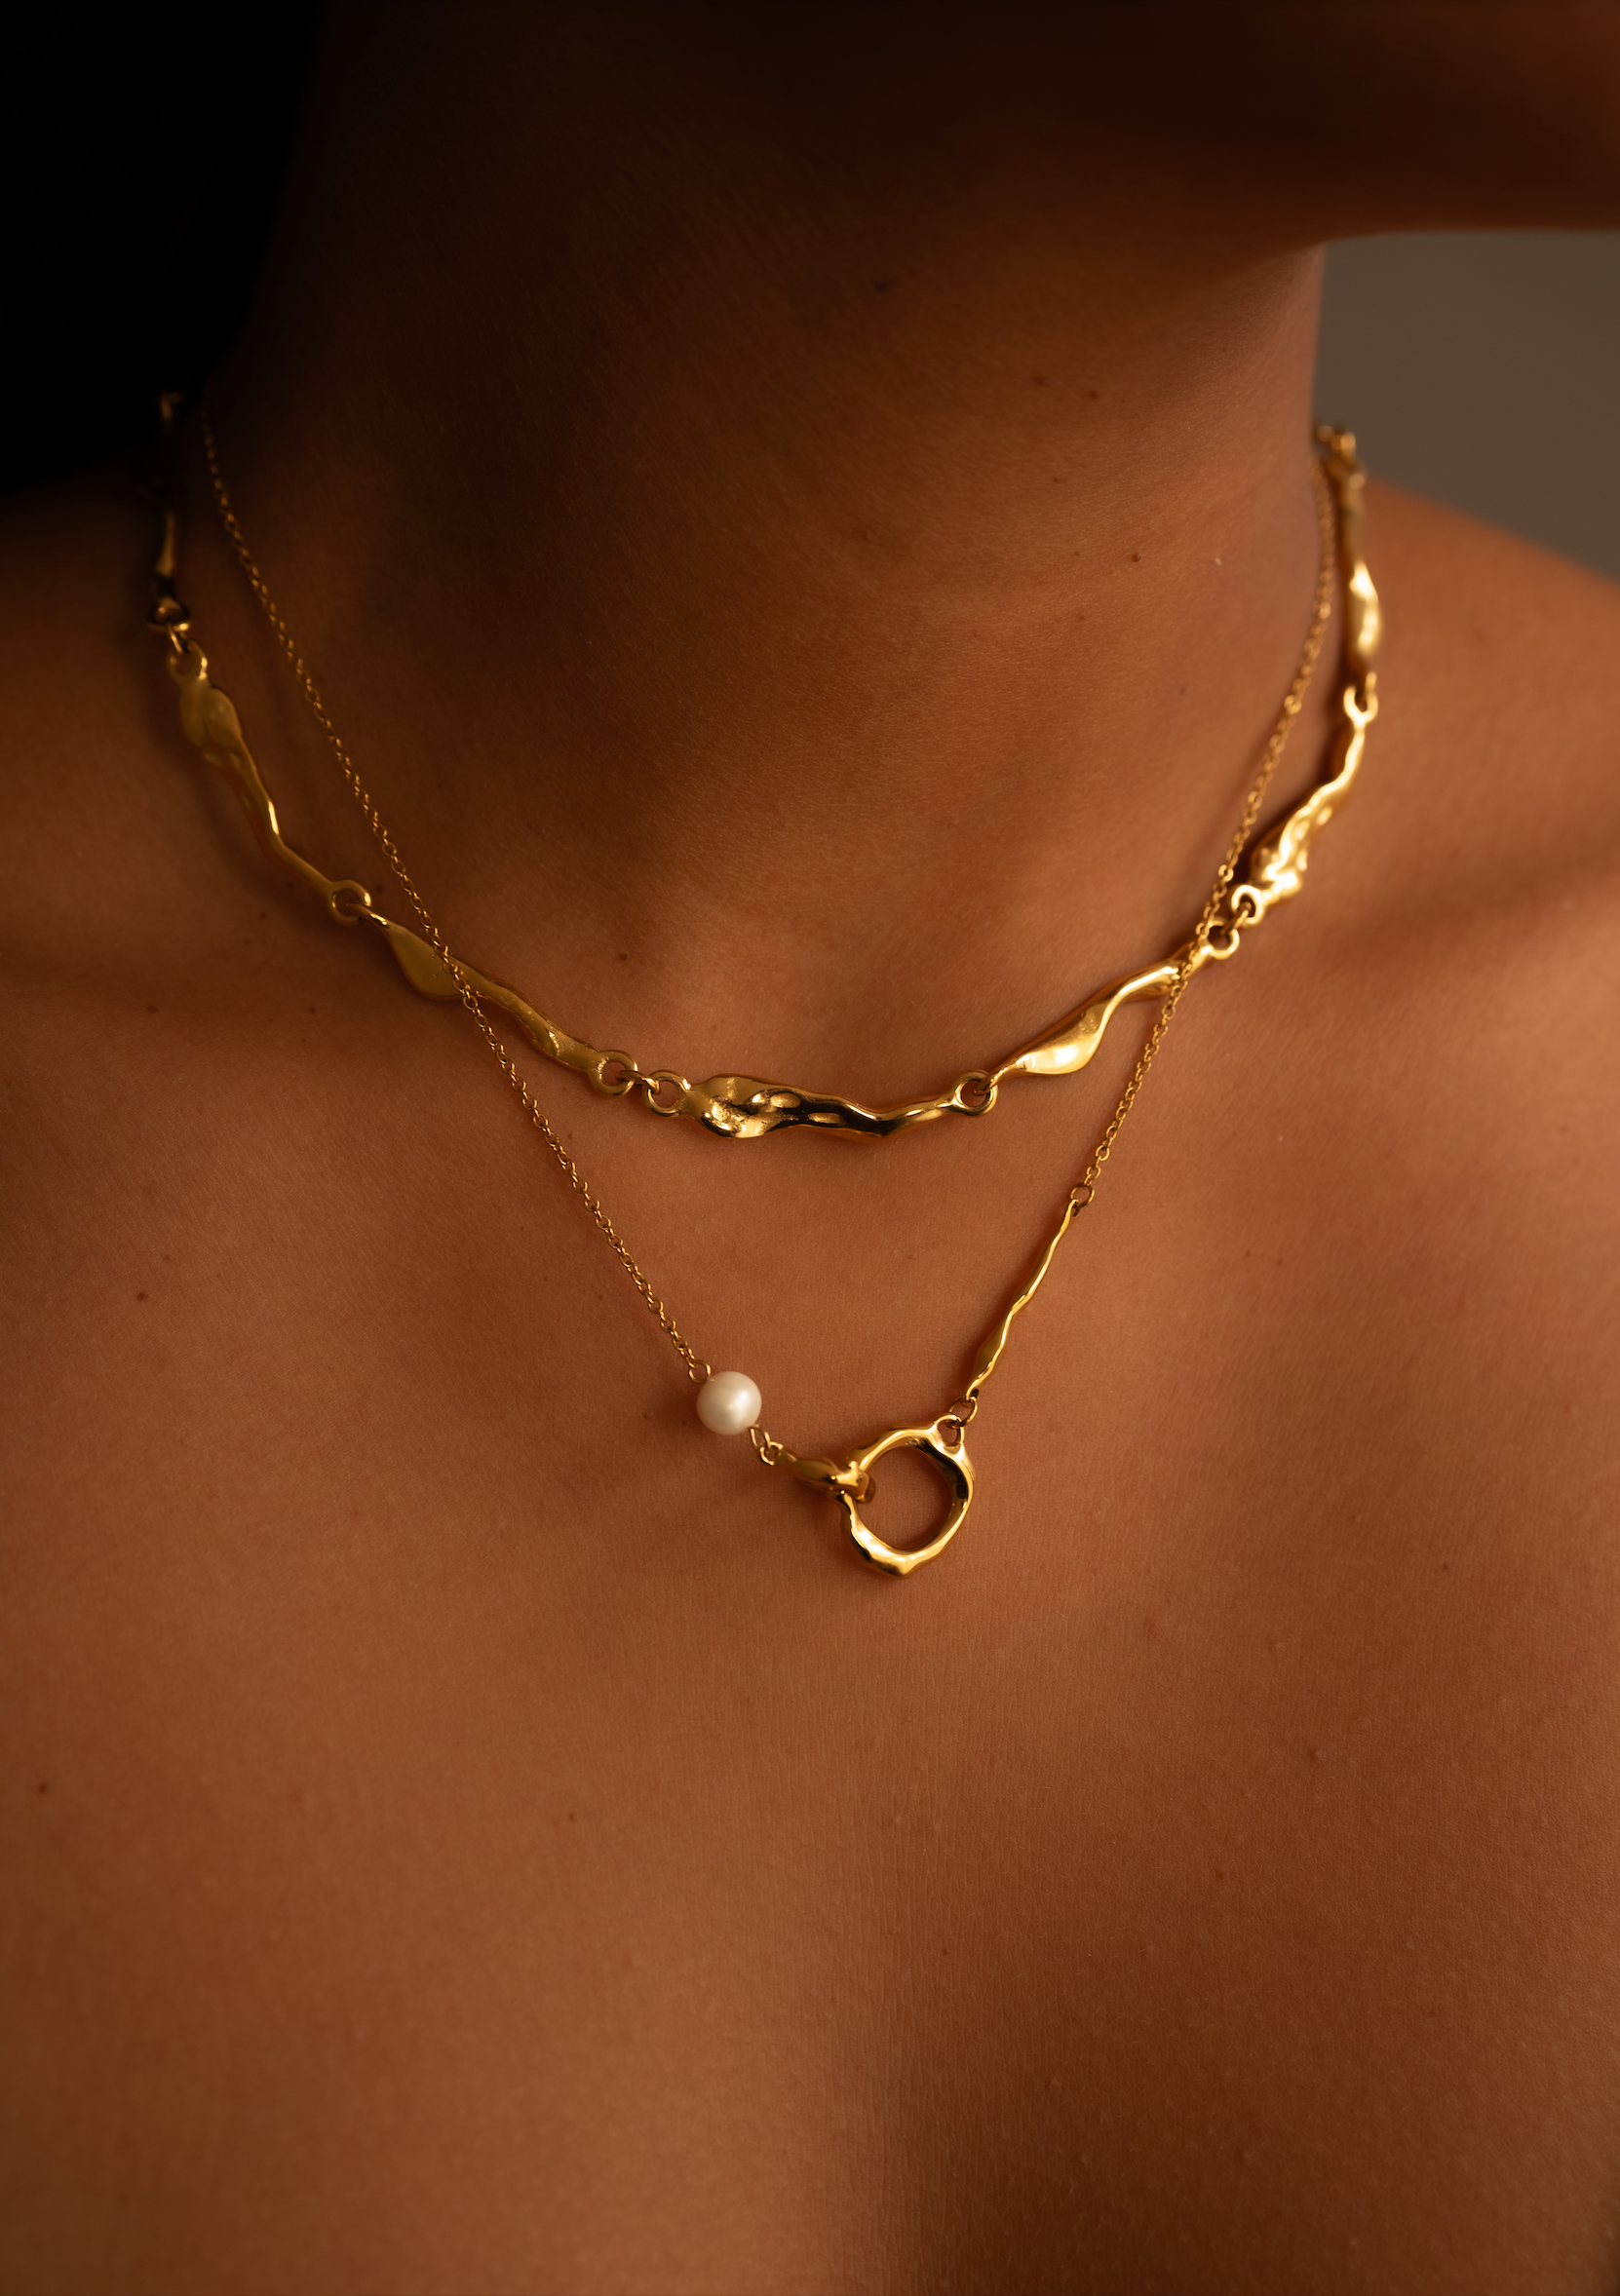 Ume Irregular Organic Gold Chain Necklace, a product by By Majime 